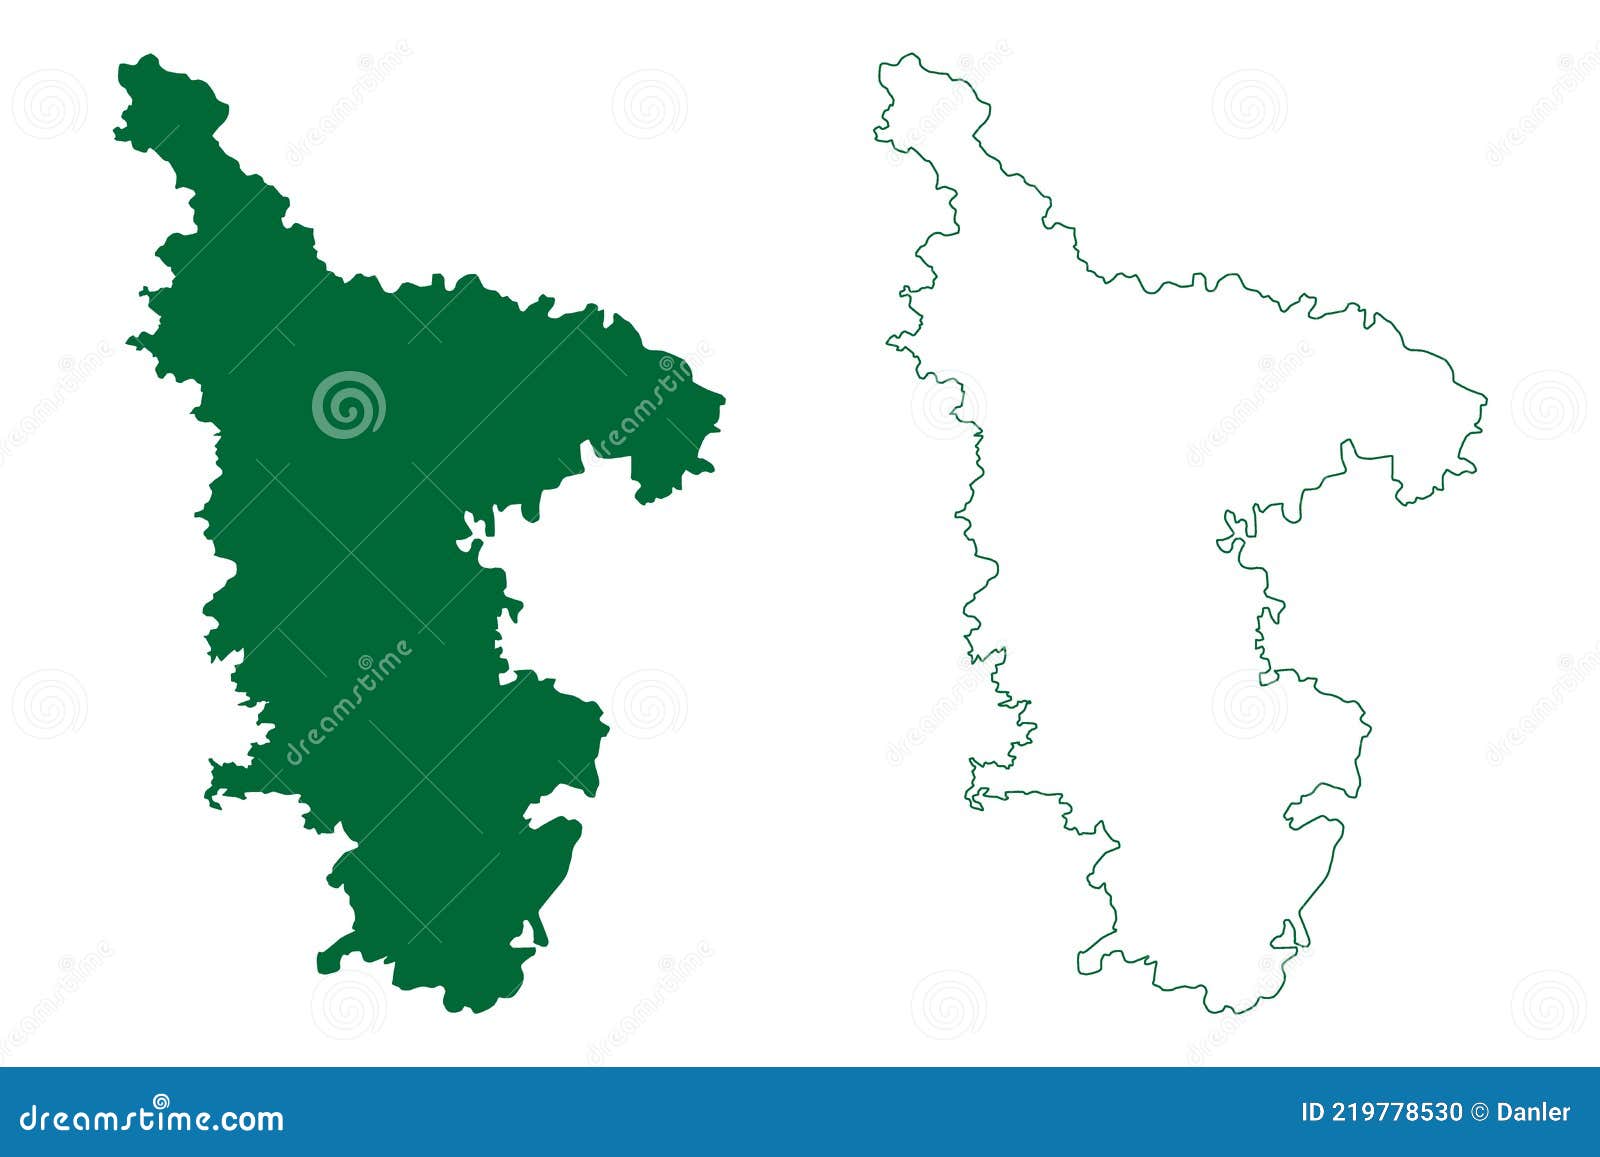 Maharashtra Map: Over 1,505 Royalty-Free Licensable Stock Illustrations &  Drawings | Shutterstock